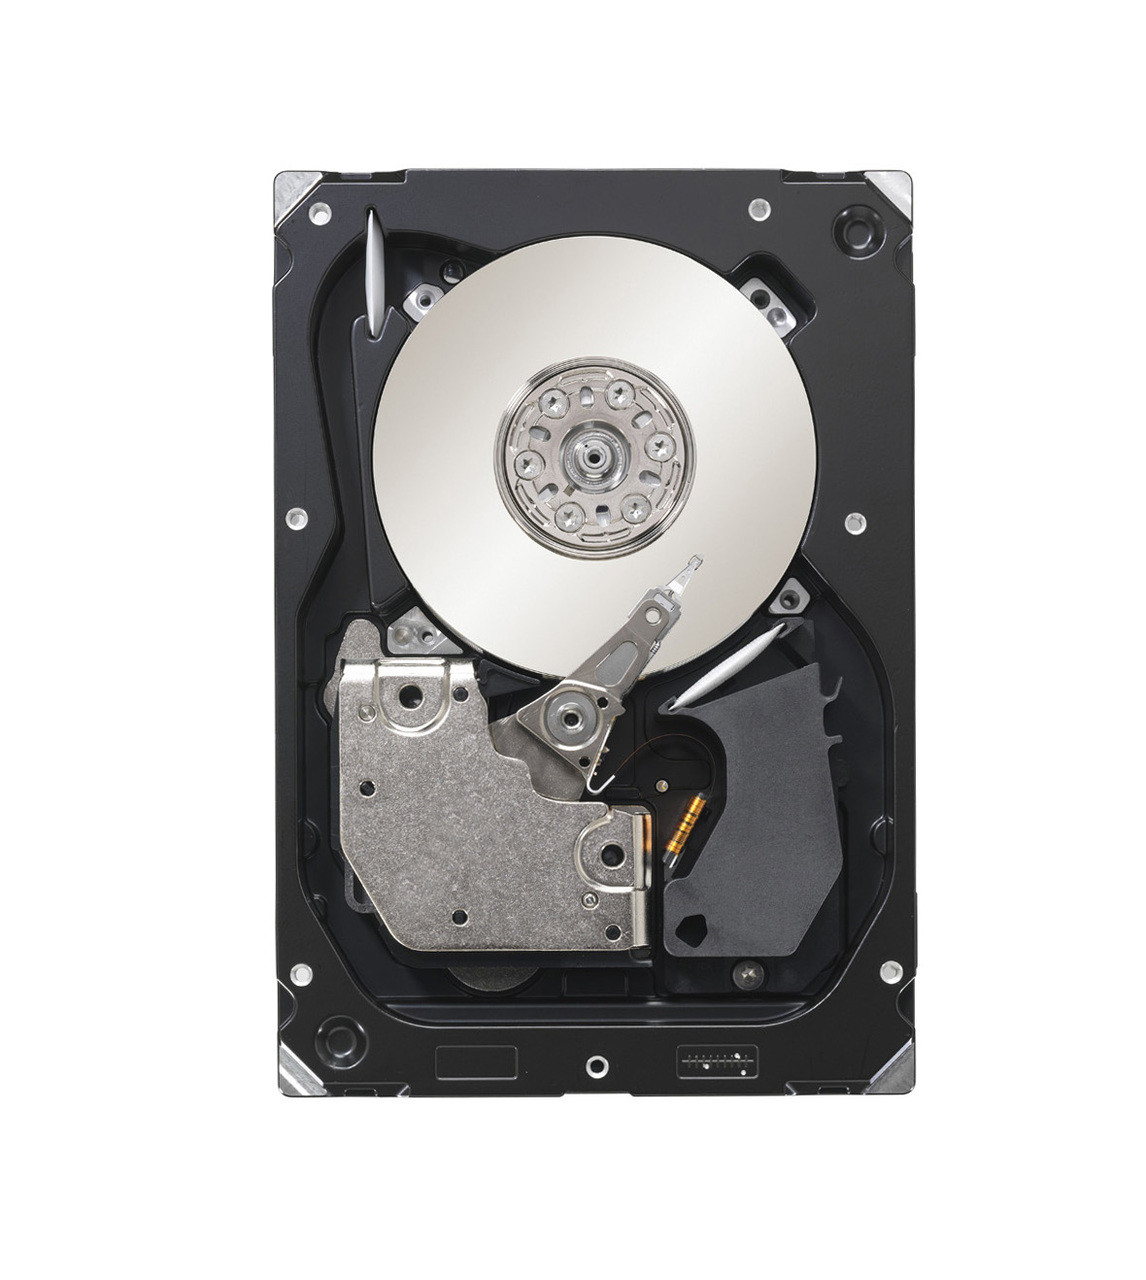 9SM260-003 - Seagate CONSTELLATION ES.2 3TB 7200RPM SERIAL ATTACHED SCSI (SAS-6GBPS) 64MB Cache 3.5-inch INTRNAL HA